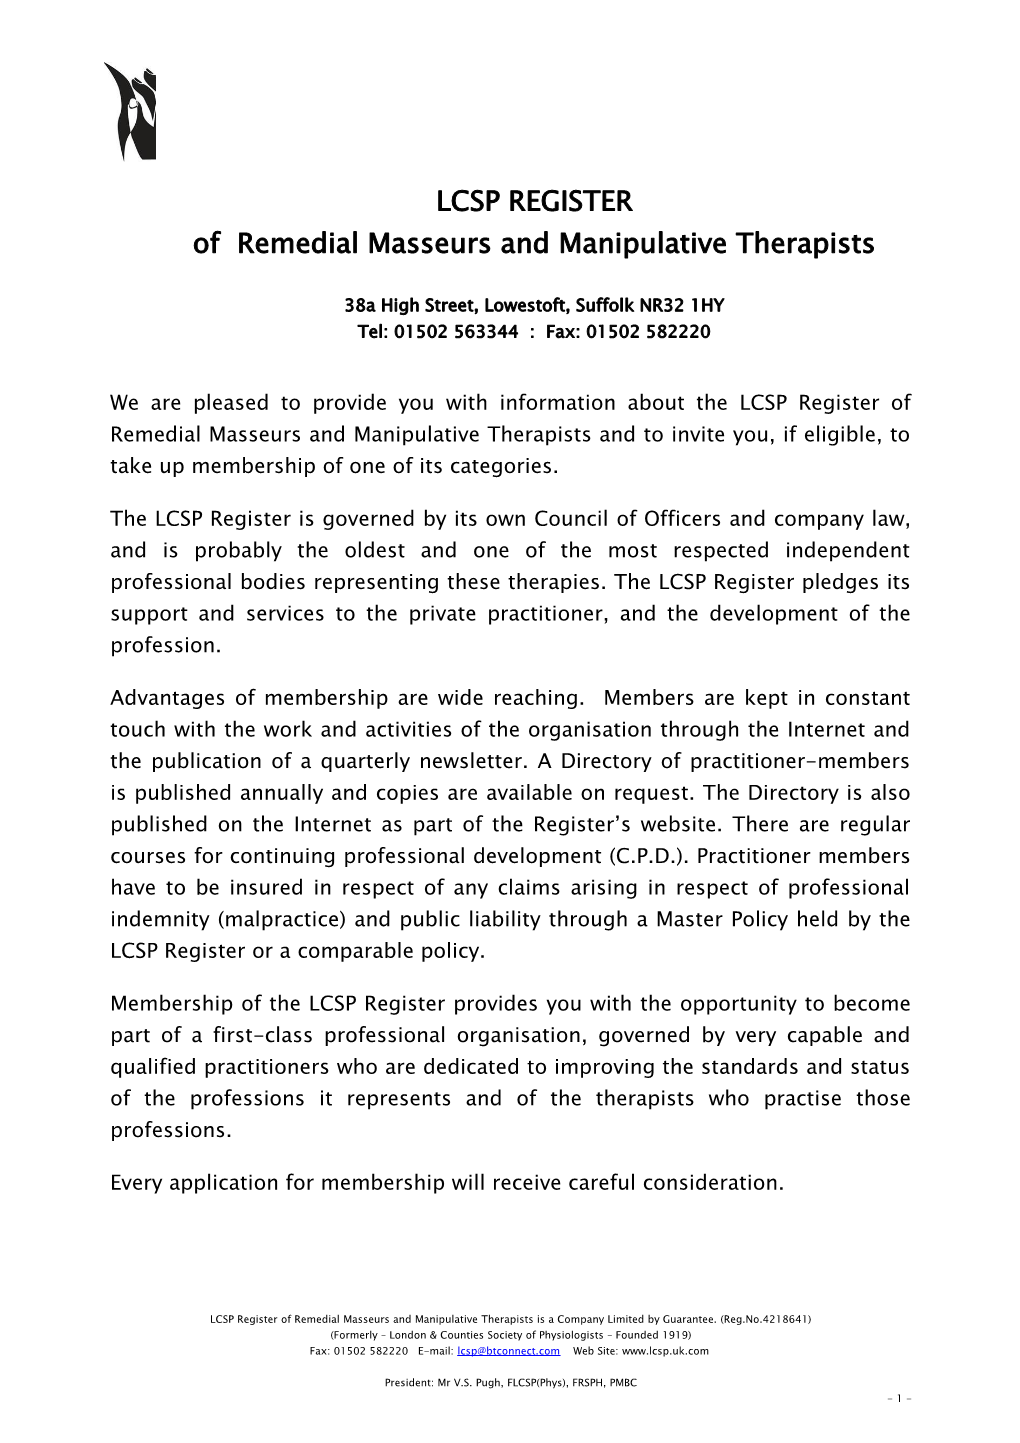 We Are Pleased to Provide You with Information About the LCSP Register of Remedial Masseurs